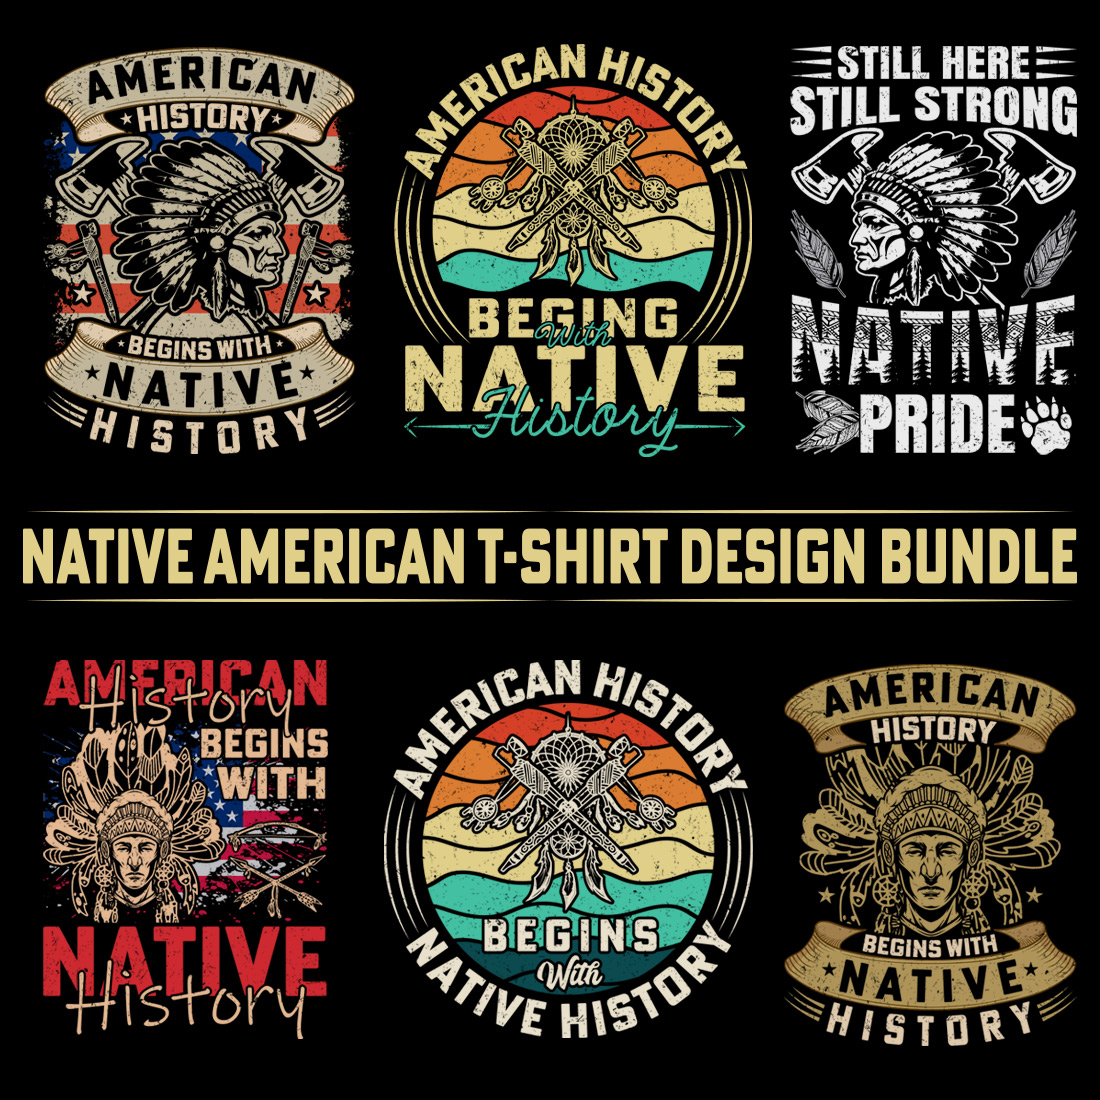 American History Begins with Native History bundle, Native American T-Shirt bundle, Native American Pride Shirts bundle, bundle t-shirt design preview image.